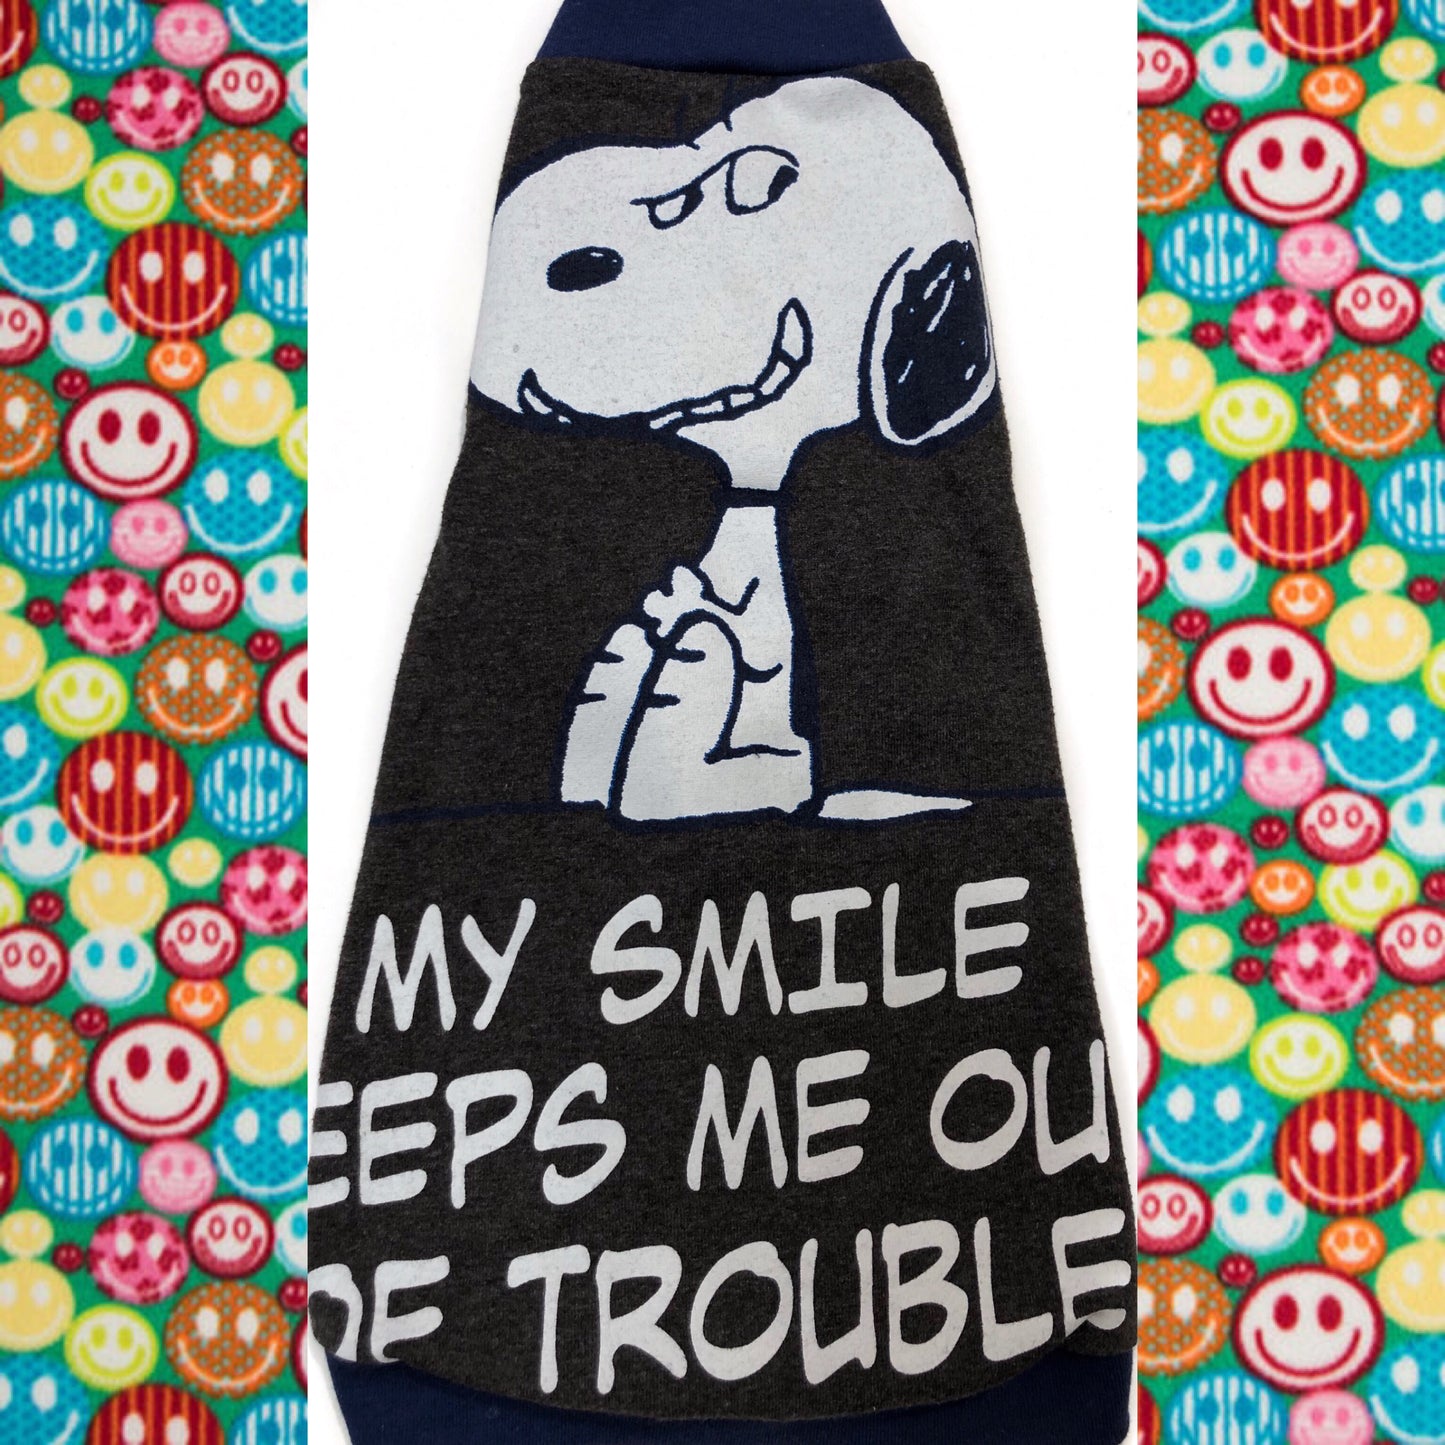 Upcycled & Altered Snoopy Peanuts - My Smile Keeps Me Out of Trouble